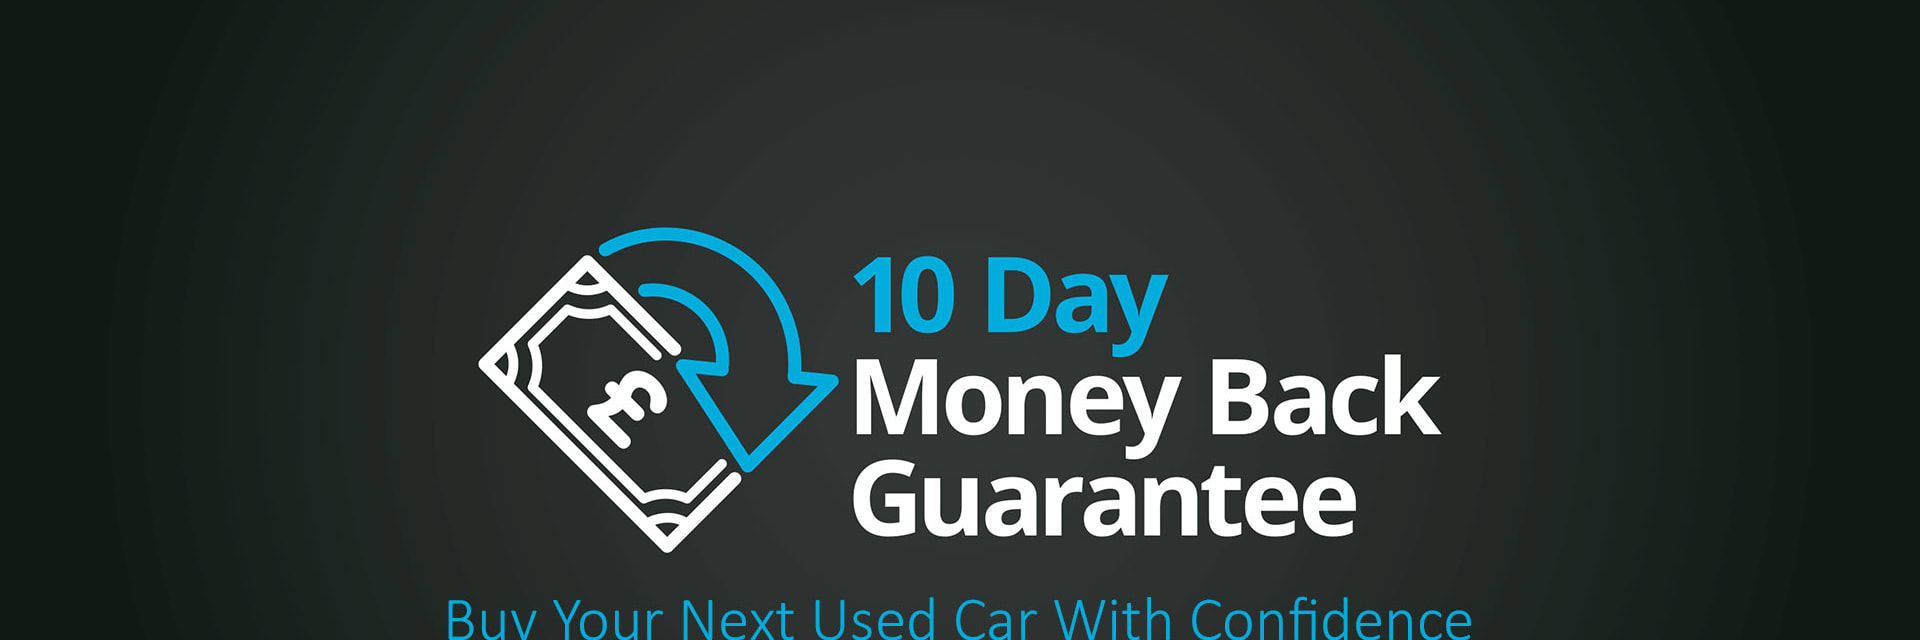 esira Approved Used 10 Day Money Back Guarantee